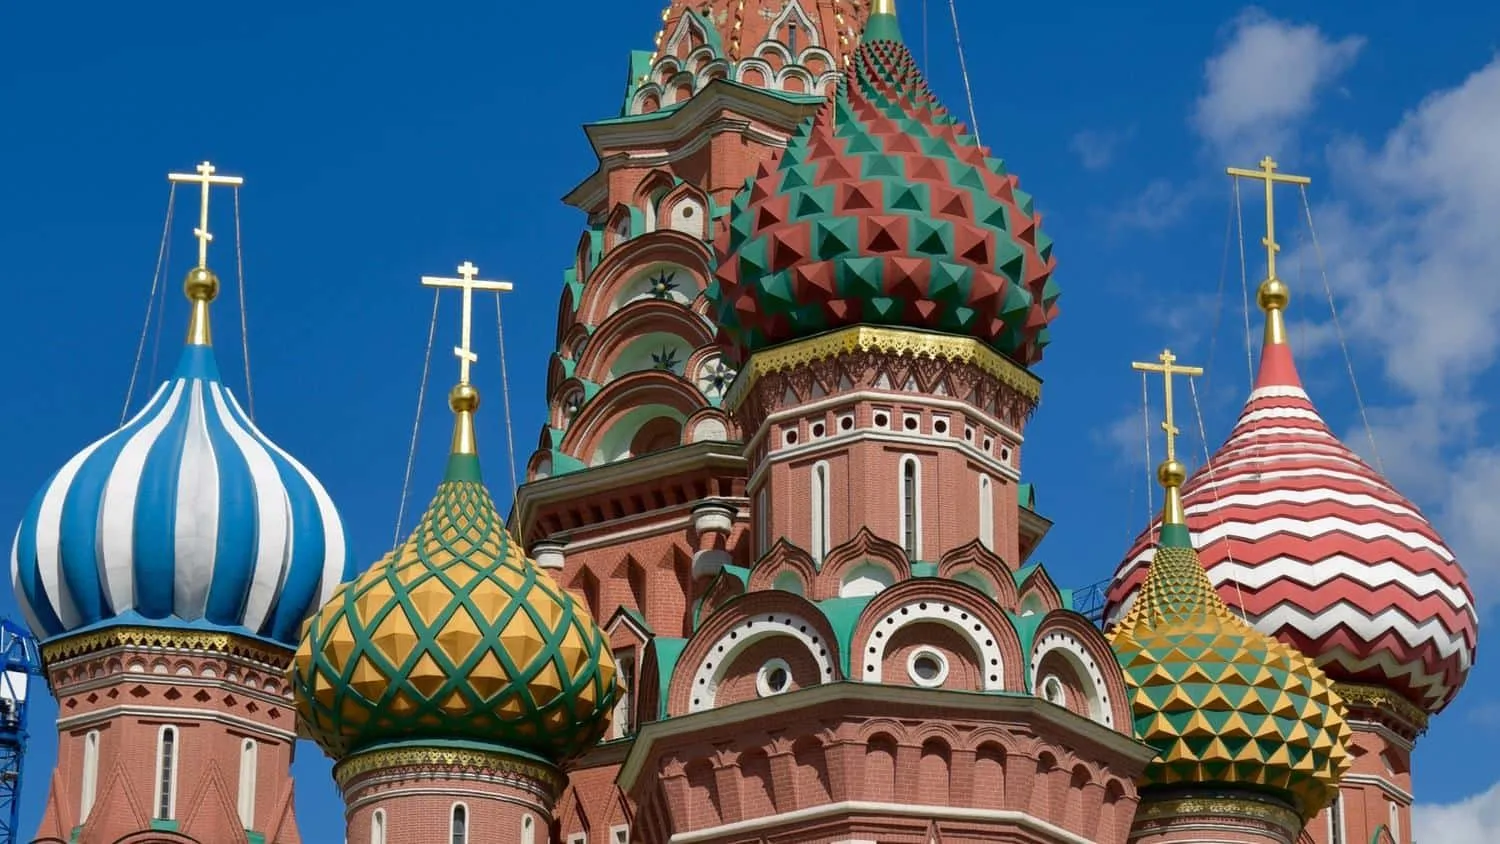 St Basils. The Best of moscow attractions